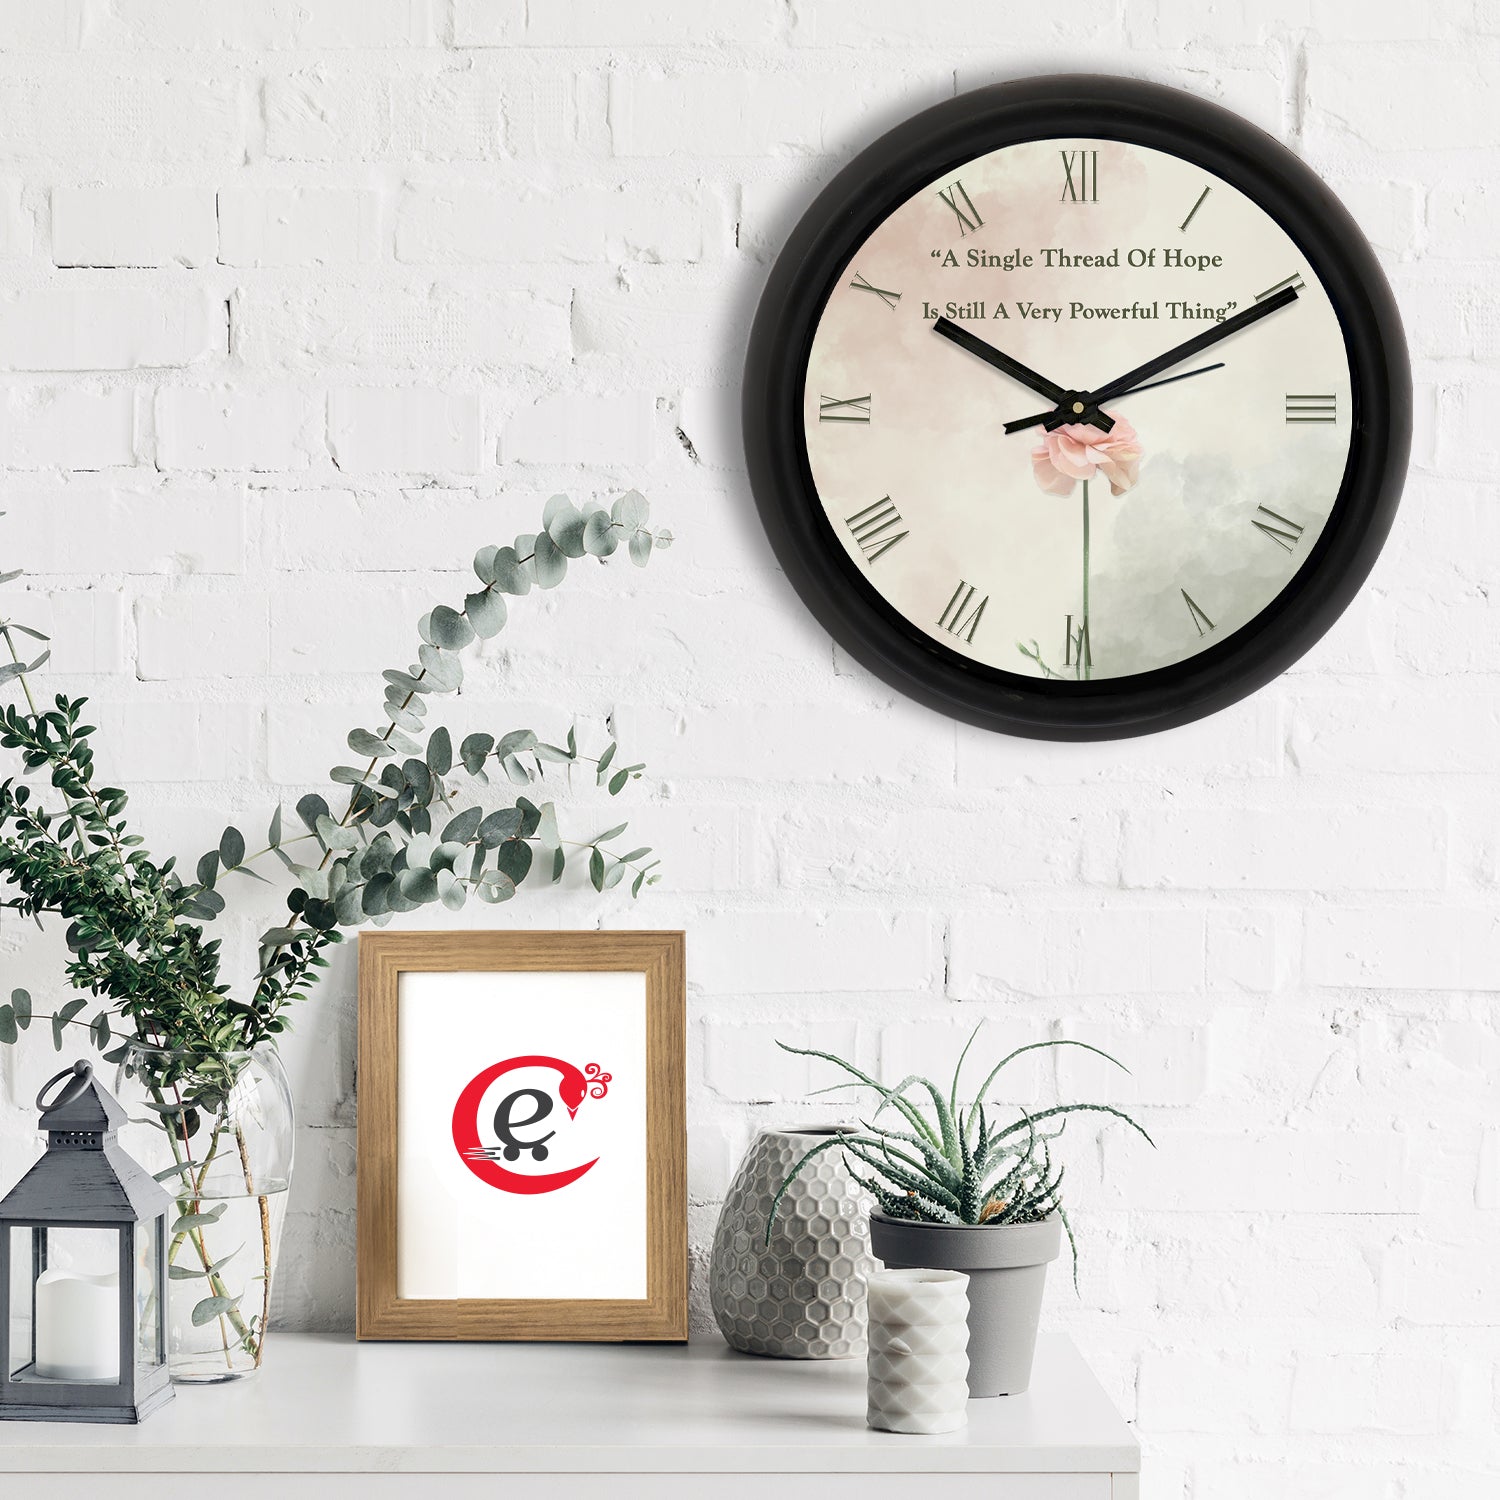 A Single Thread Of Hope Is Still A Very Powerful Thing Motivational Quote Round Shape Designer Wall Clock 1